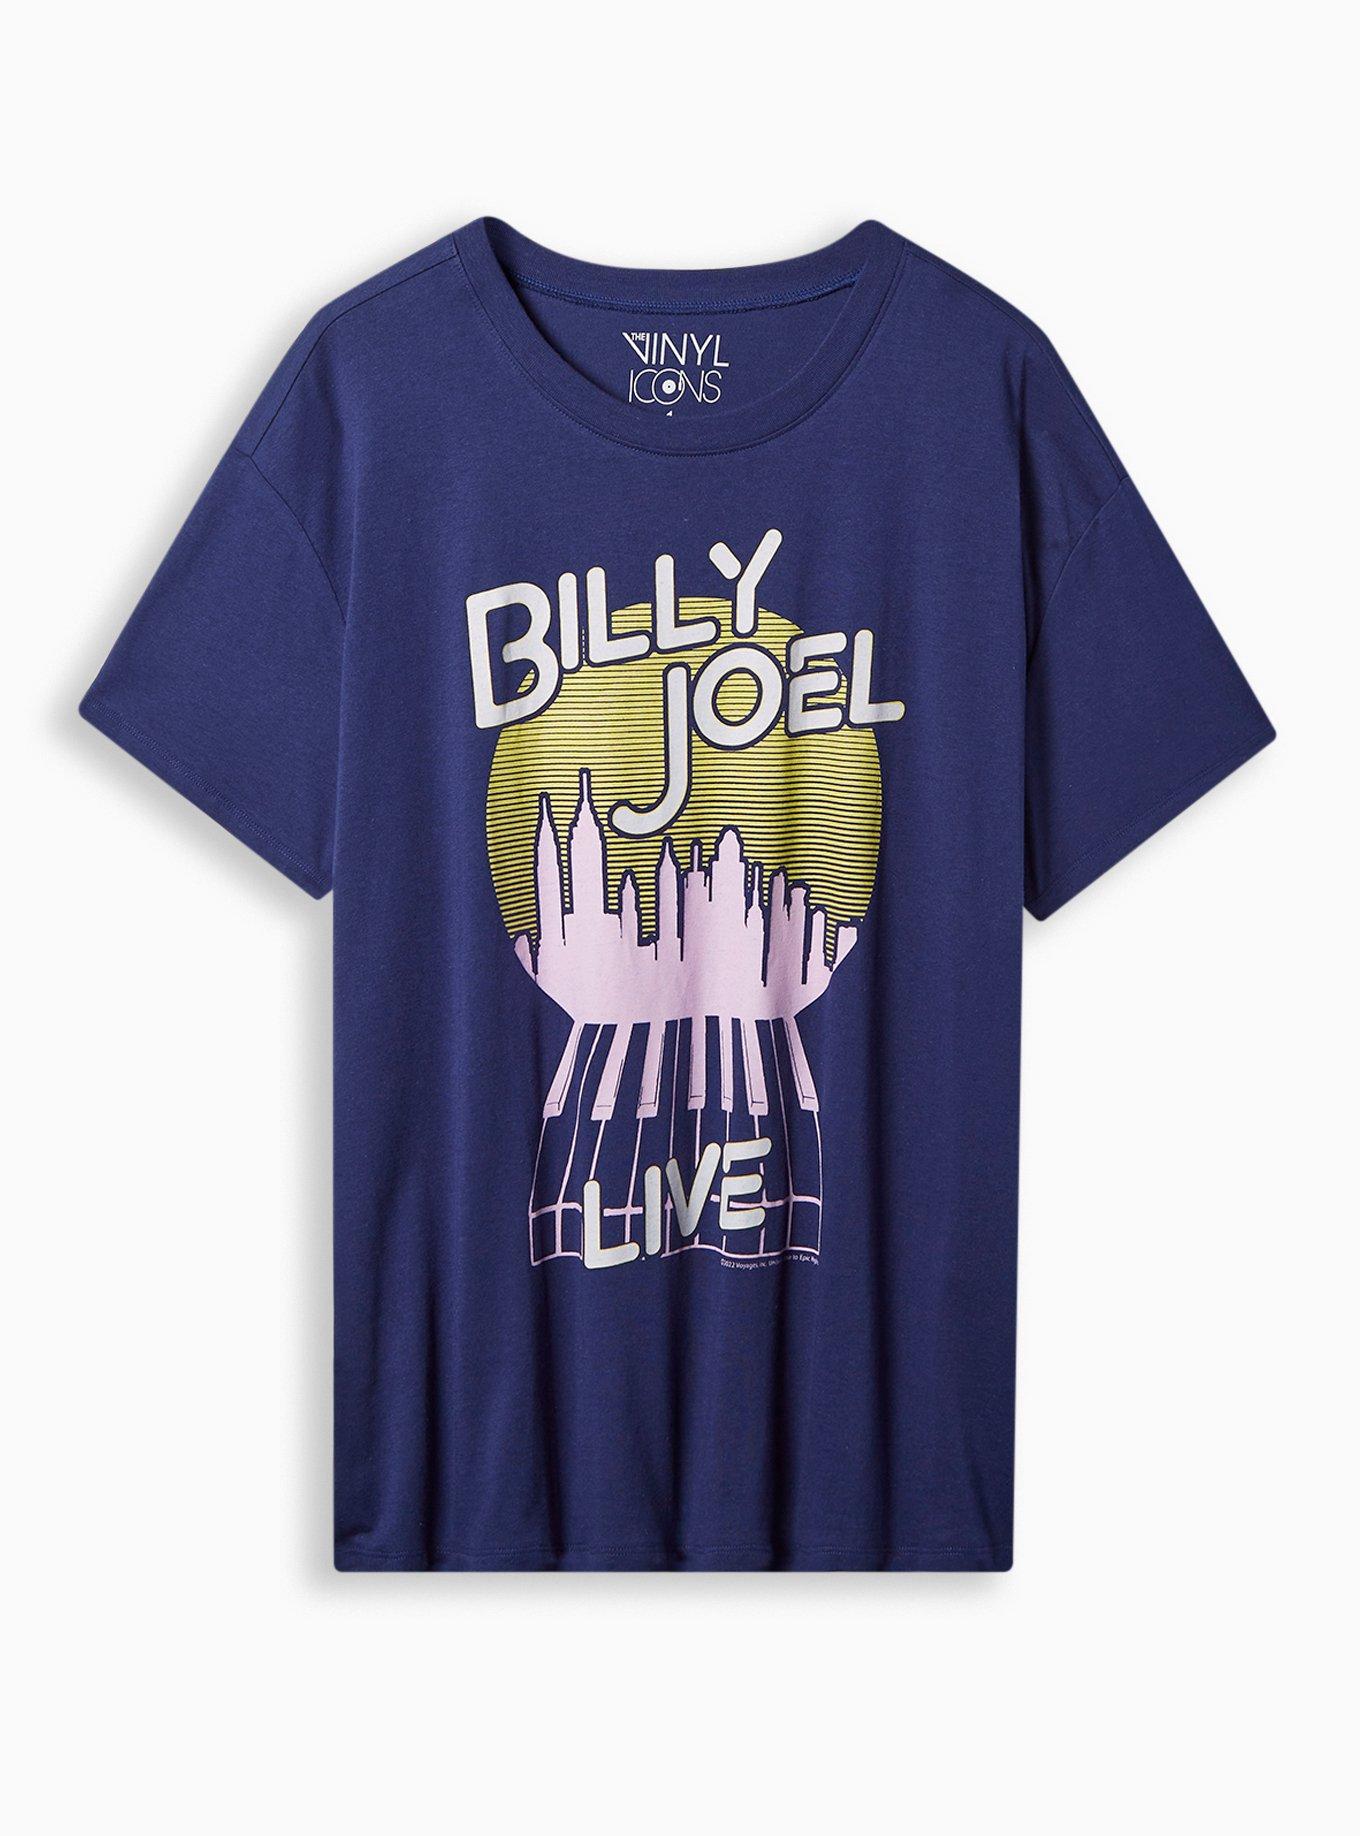 Plus Size - Billy Joel Relaxed Fit Cotton Crew Neck Tee - Torrid